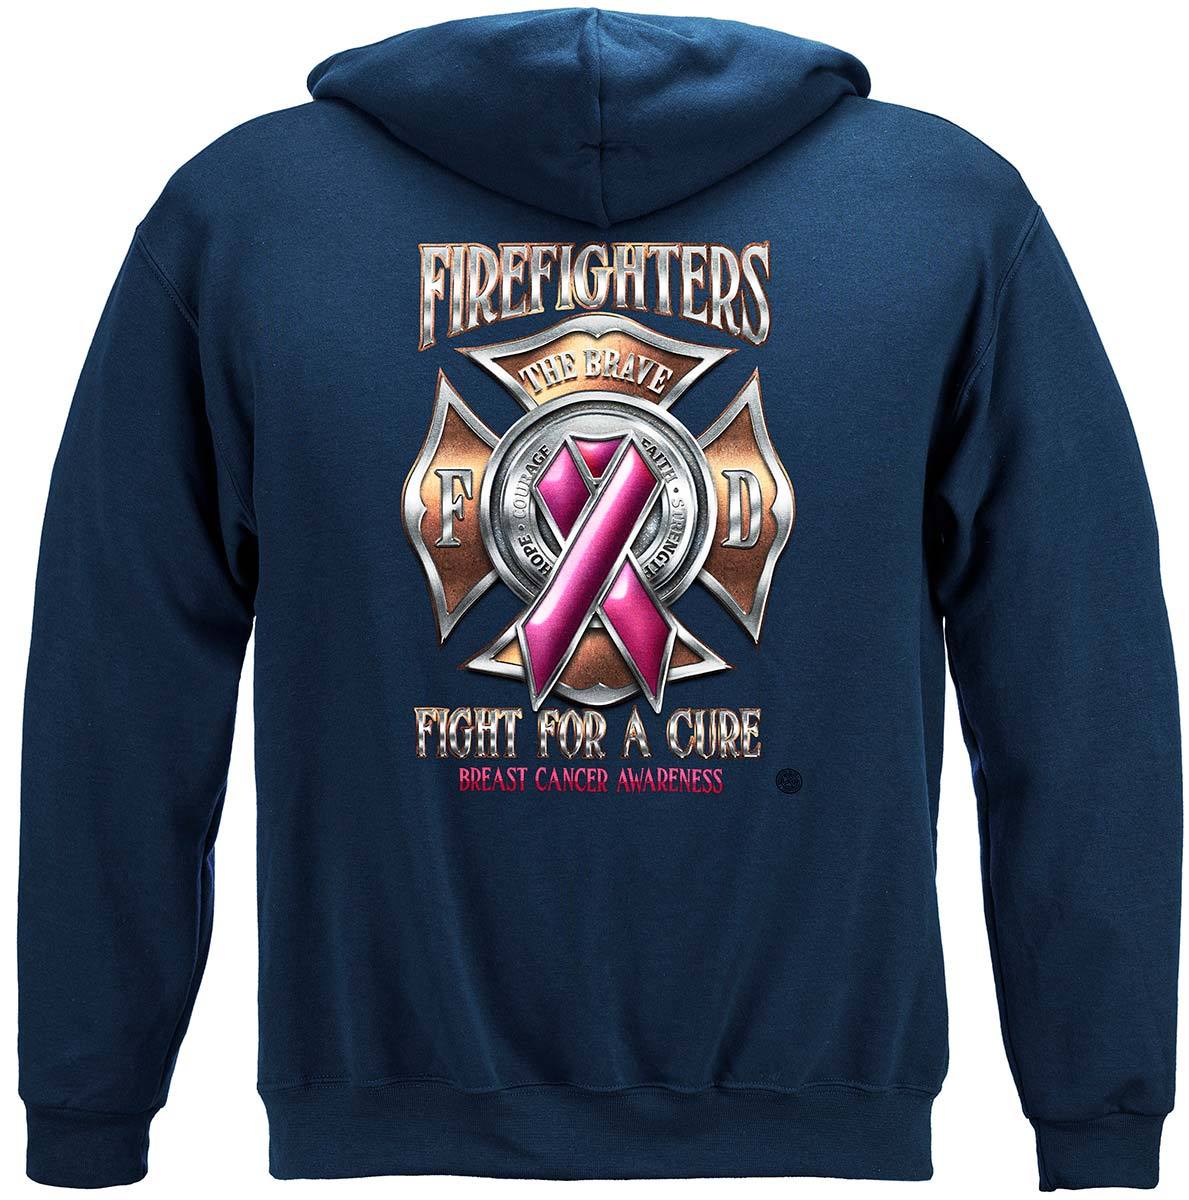 Firefighter Race For A Cure Premium Hooded Sweat Shirt